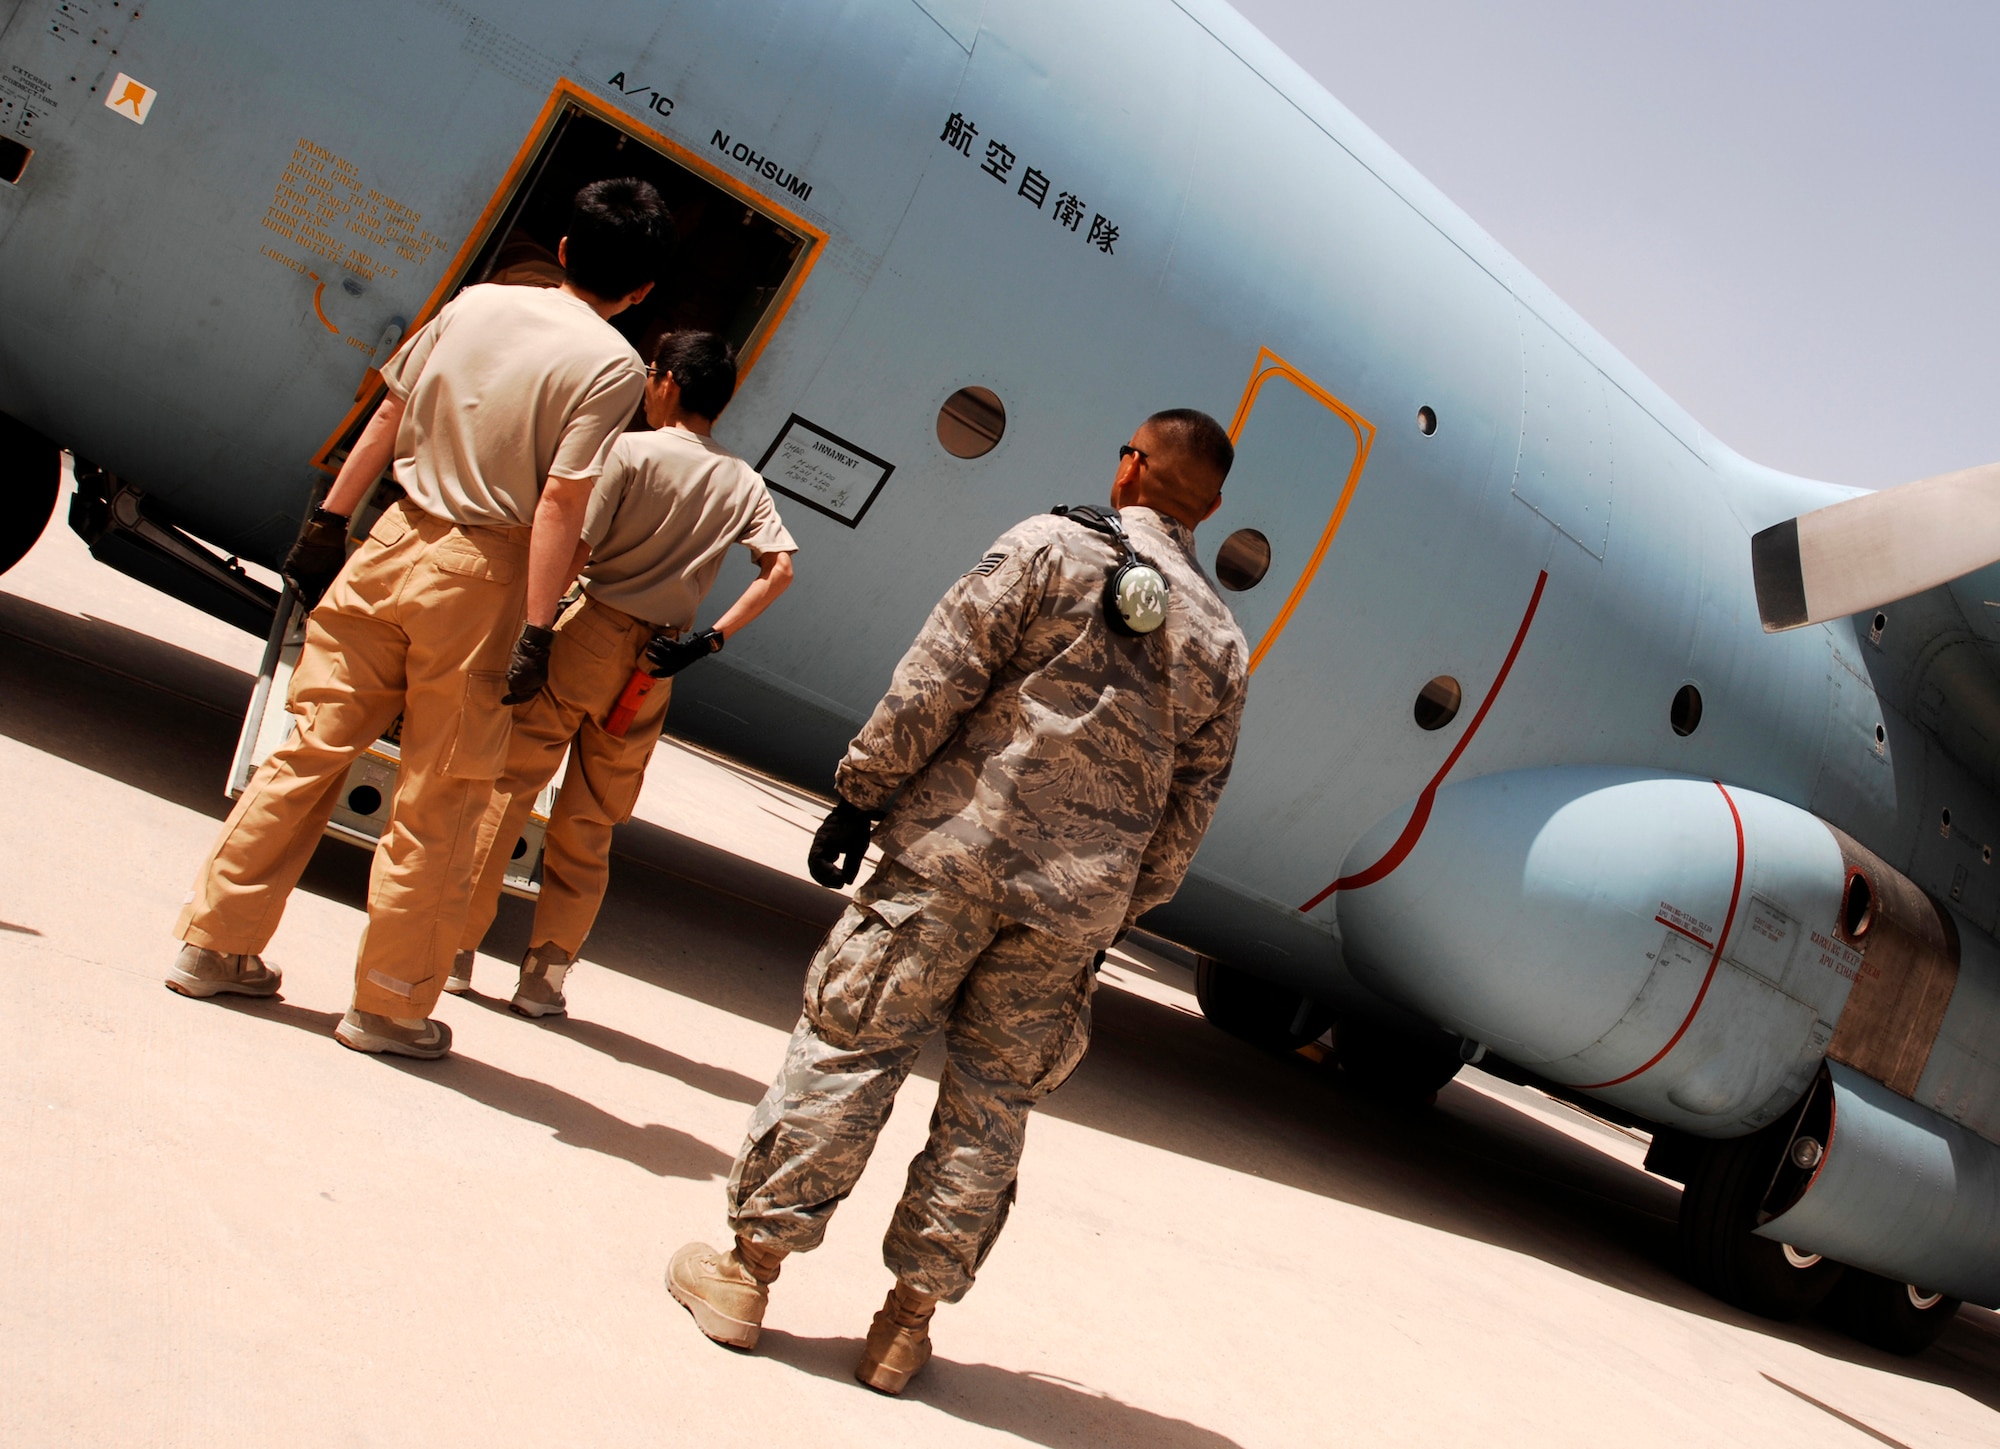 SOUTHWEST ASIA -- Staff Sgt. Ray Pontemayor (center), a maintainer deployed to the 386th Expeditionary Aircraft Maintenance Squadron, waits as personnel disembark from a Japan Air Self-Defense Force C-130 Hercules March 21, 2008, at air base in the Persian Gulf Region. Airmen from the U.S., JASDF, and Republic of Korea Air Force 58th Airlift Wing participated in a coalition maintenance exchange program allowing maintainers to sharpen their skills, exchange ideas, and promote closer relations among coalition air forces supporting the Global War on Terrorism. (U.S. Air Force photo/ Staff Sgt. Patrick Dixon)